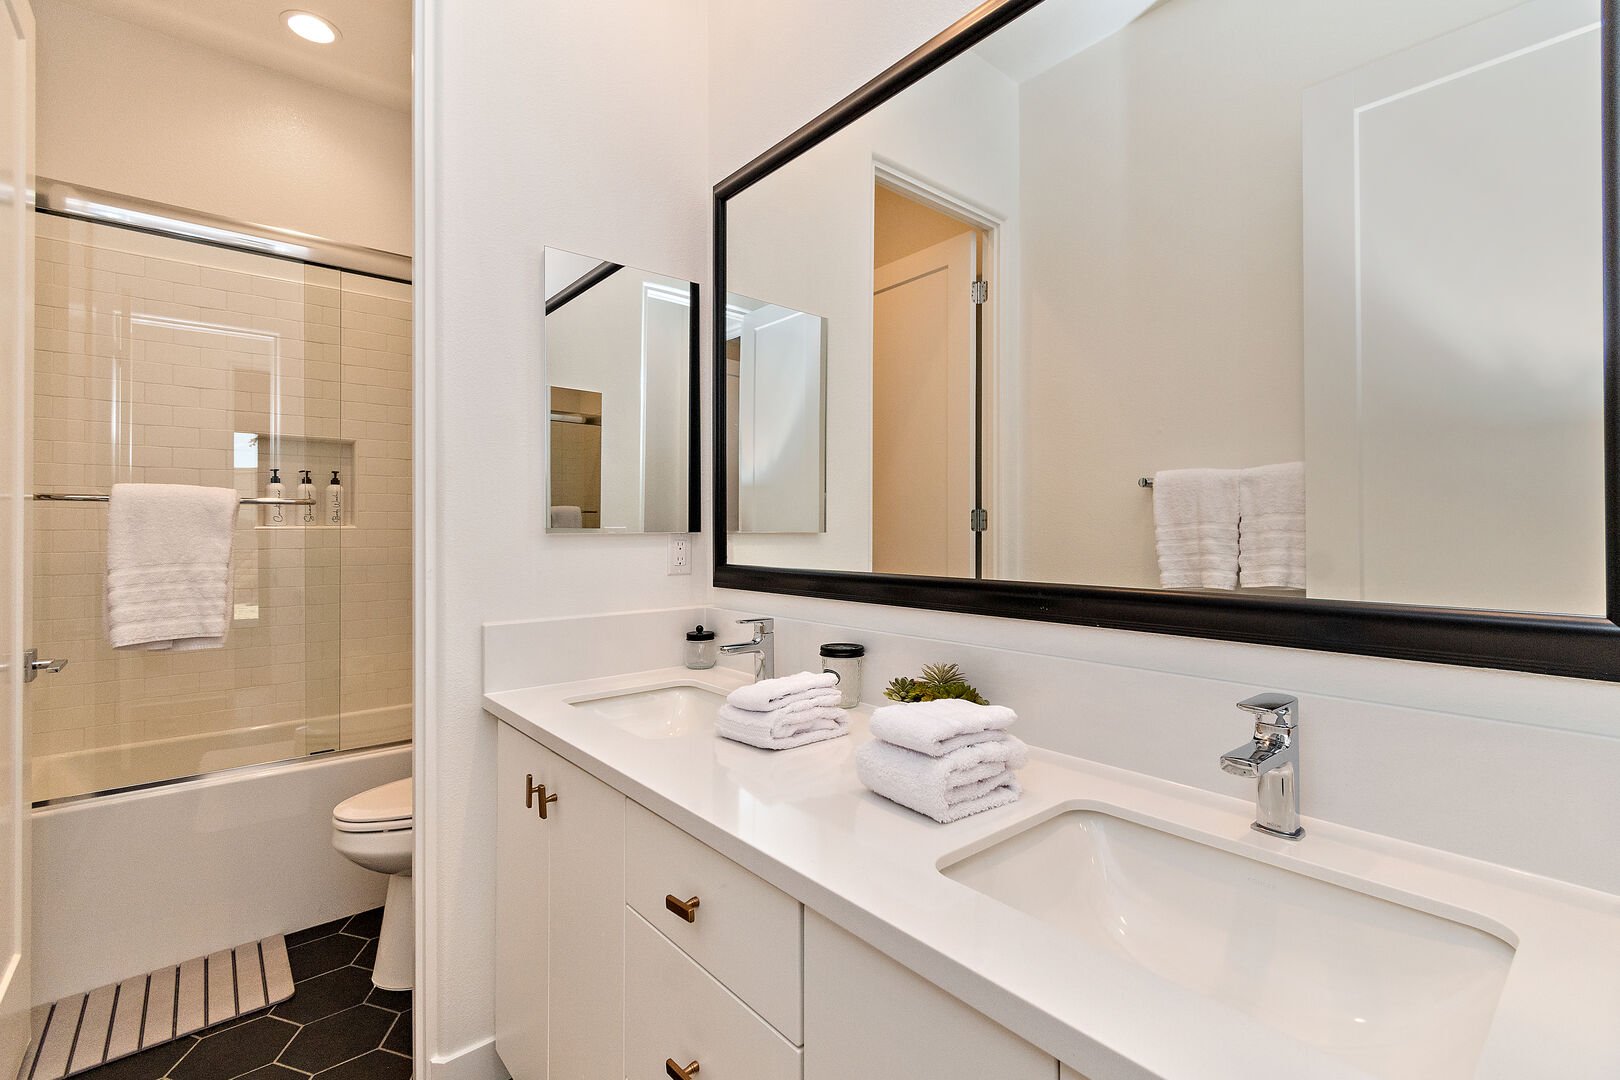 The hallway bathroom is located across bedroom two and features a bathtub, shower combo, and two vanity sinks.